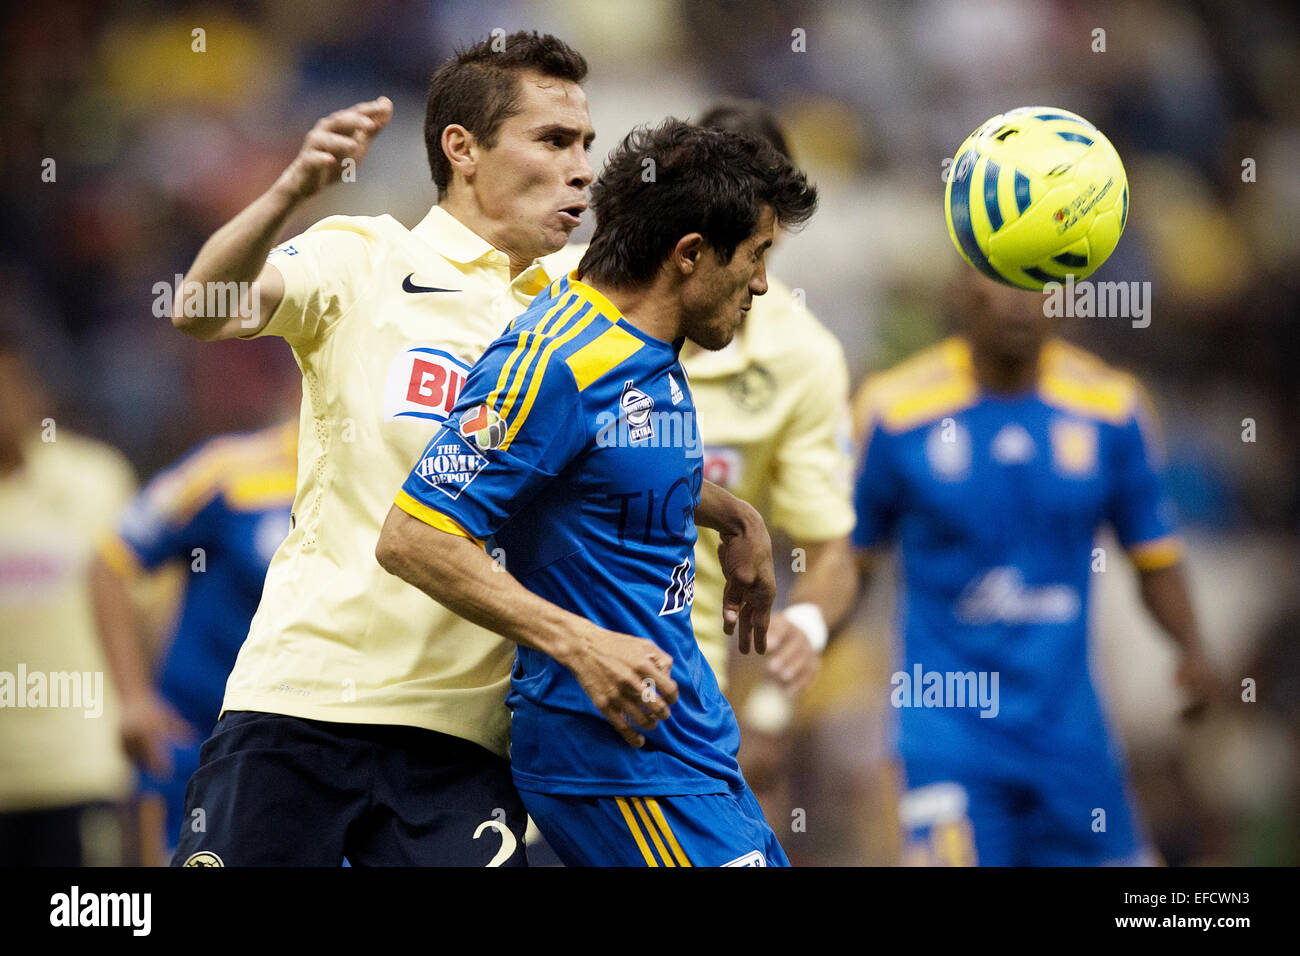 Mexico City, Mexico. 31st Jan, 2015. America's Paul Aguilar (L) vies with Tigres' Damian Alvarez during a match of the Closing Tournament 2015 of MX League in the Azteca Stadium, in Mexico City, capital of Mexico, on Jan. 31, 2015. Credit:  Alejandro Ayala/Xinhua/Alamy Live News Stock Photo